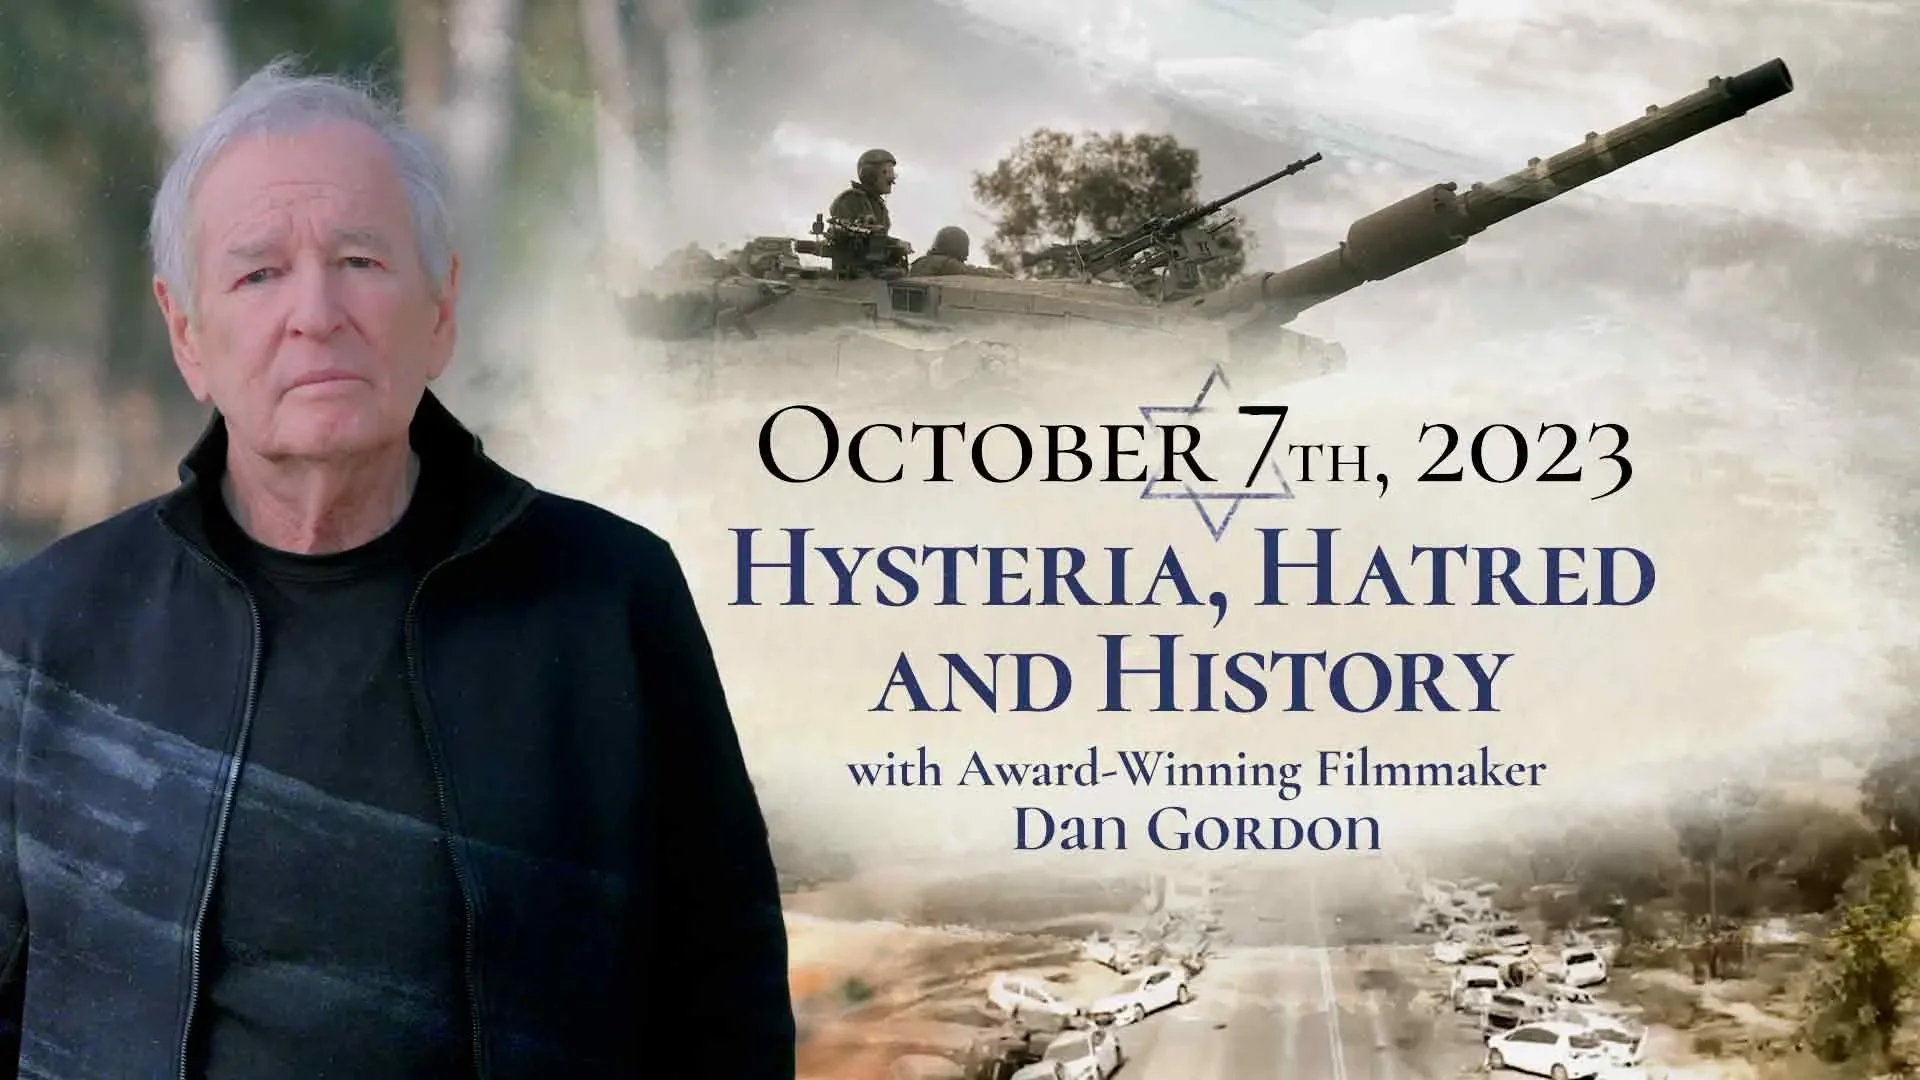 Hysteria, Hatred and History